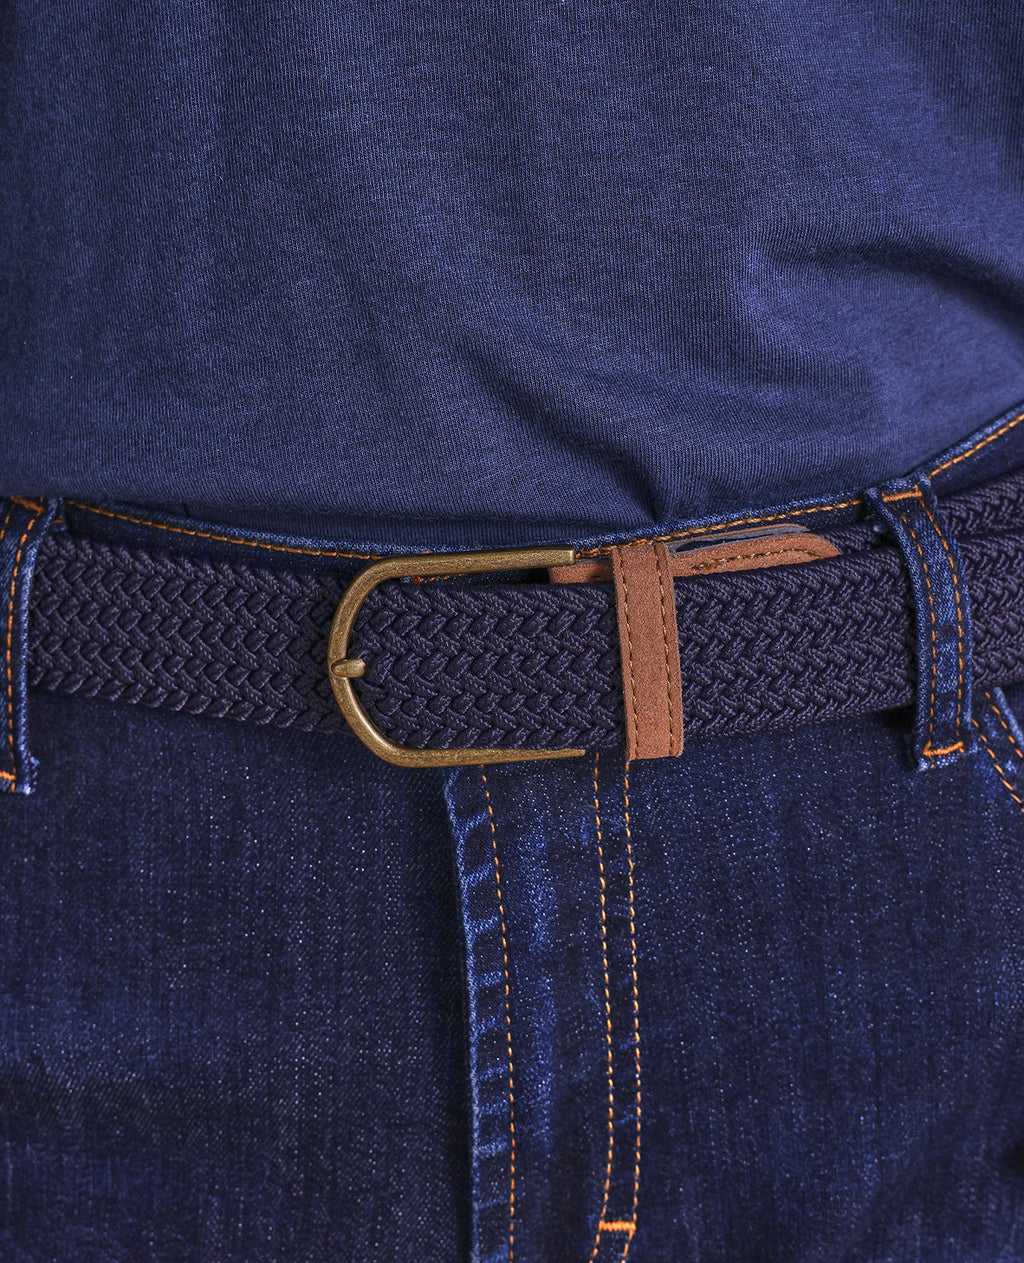 The Voyager - Woven Stretch Belt w/Suede Trim - Navy